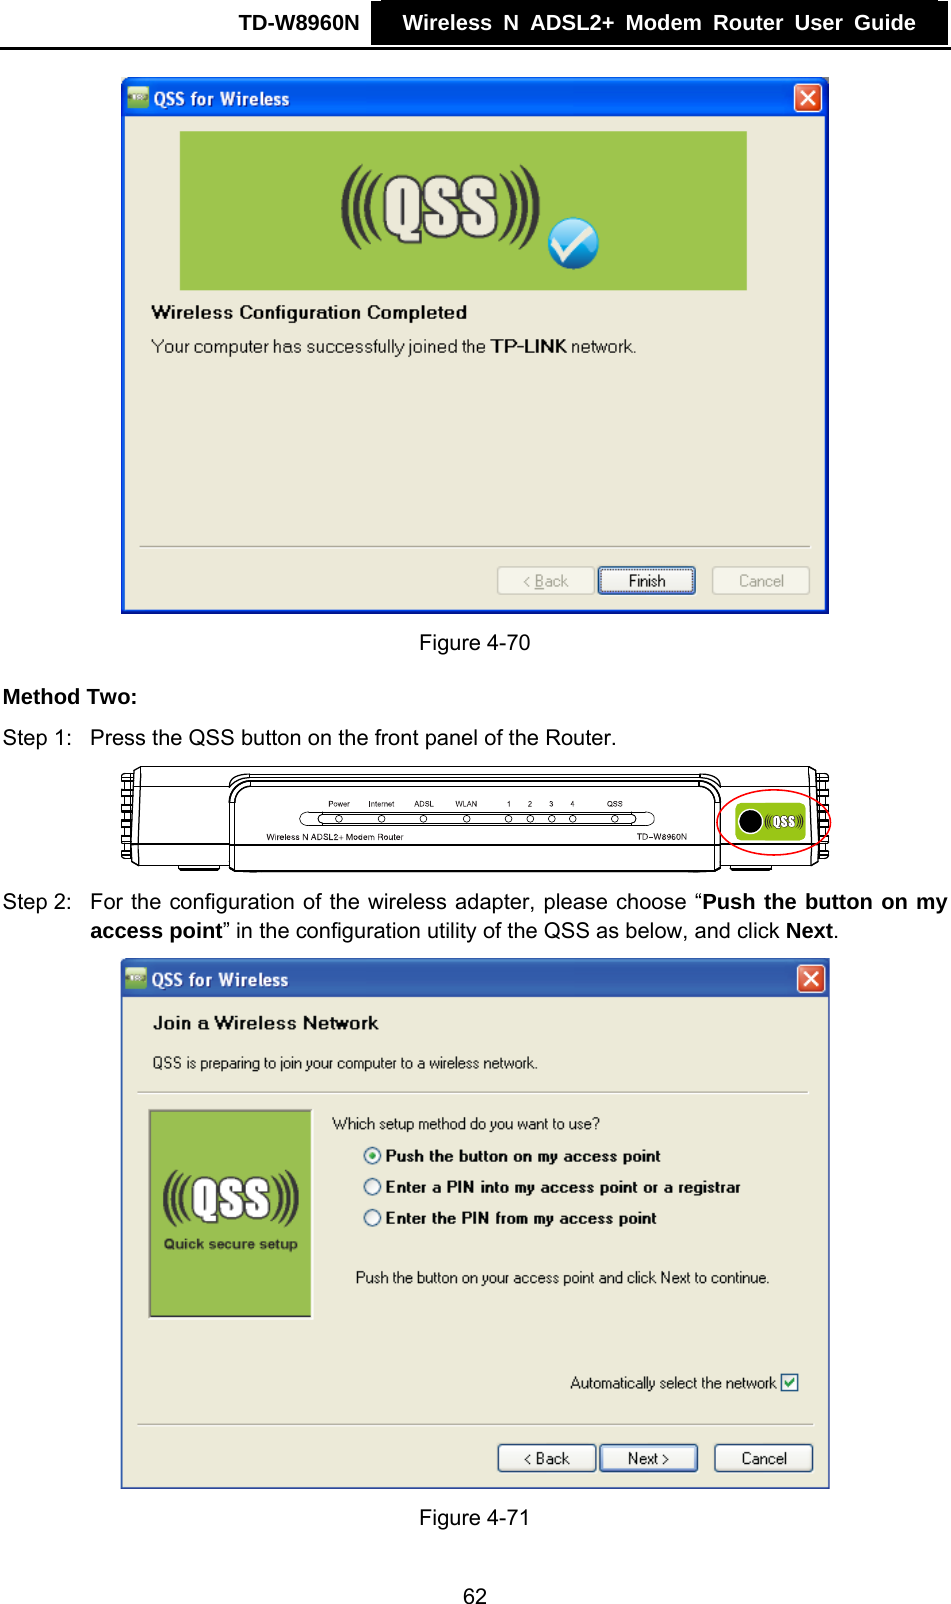 TD-W8960N    Wireless N ADSL2+ Modem Router User Guide     Figure 4-70 Method Two: Step 1:  Press the QSS button on the front panel of the Router.  Step 2:  For the configuration of the wireless adapter, please choose “Push the button on my access point” in the configuration utility of the QSS as below, and click Next.   Figure 4-71 62 